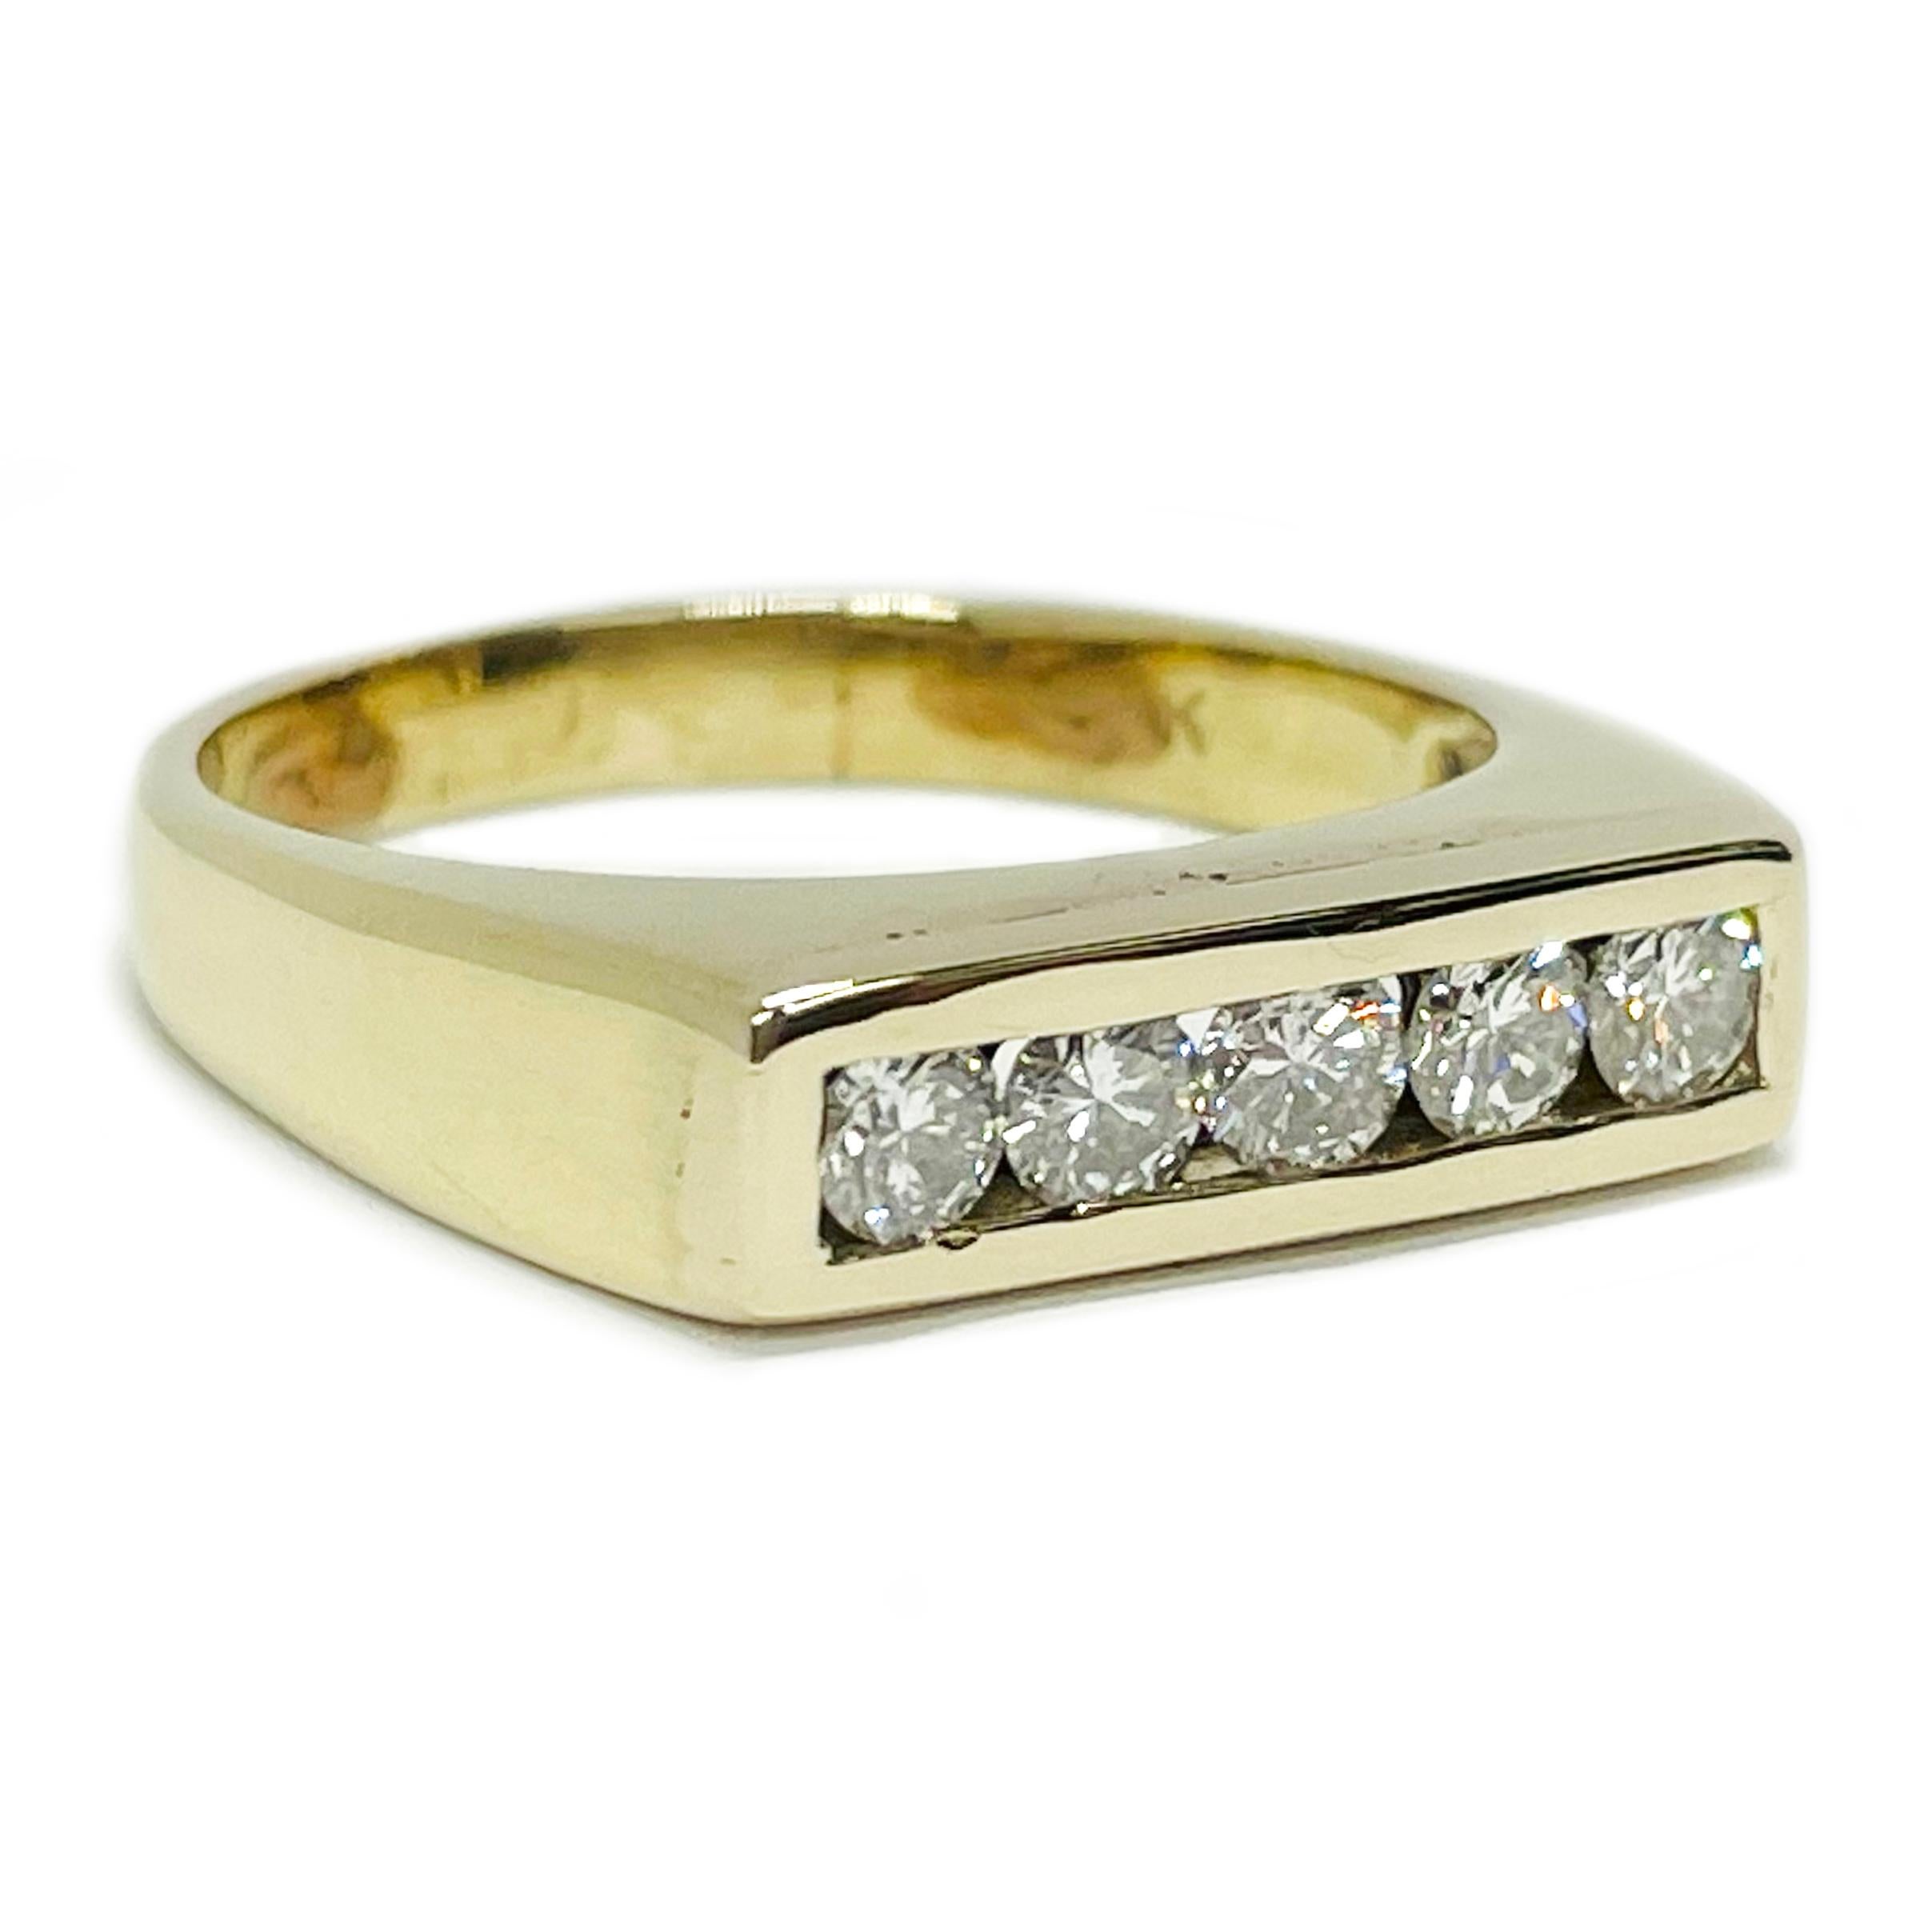 Gentleman’s 14 Karat Yellow Gold Channel-Set Diamond Ring. Simple yet sophisticated design. Five round brilliant-cut diamonds channel-set in 14k yellow gold. The diamonds have a total carat weight 0.70ctw. The diamonds each measure 3.5mm and are SI2